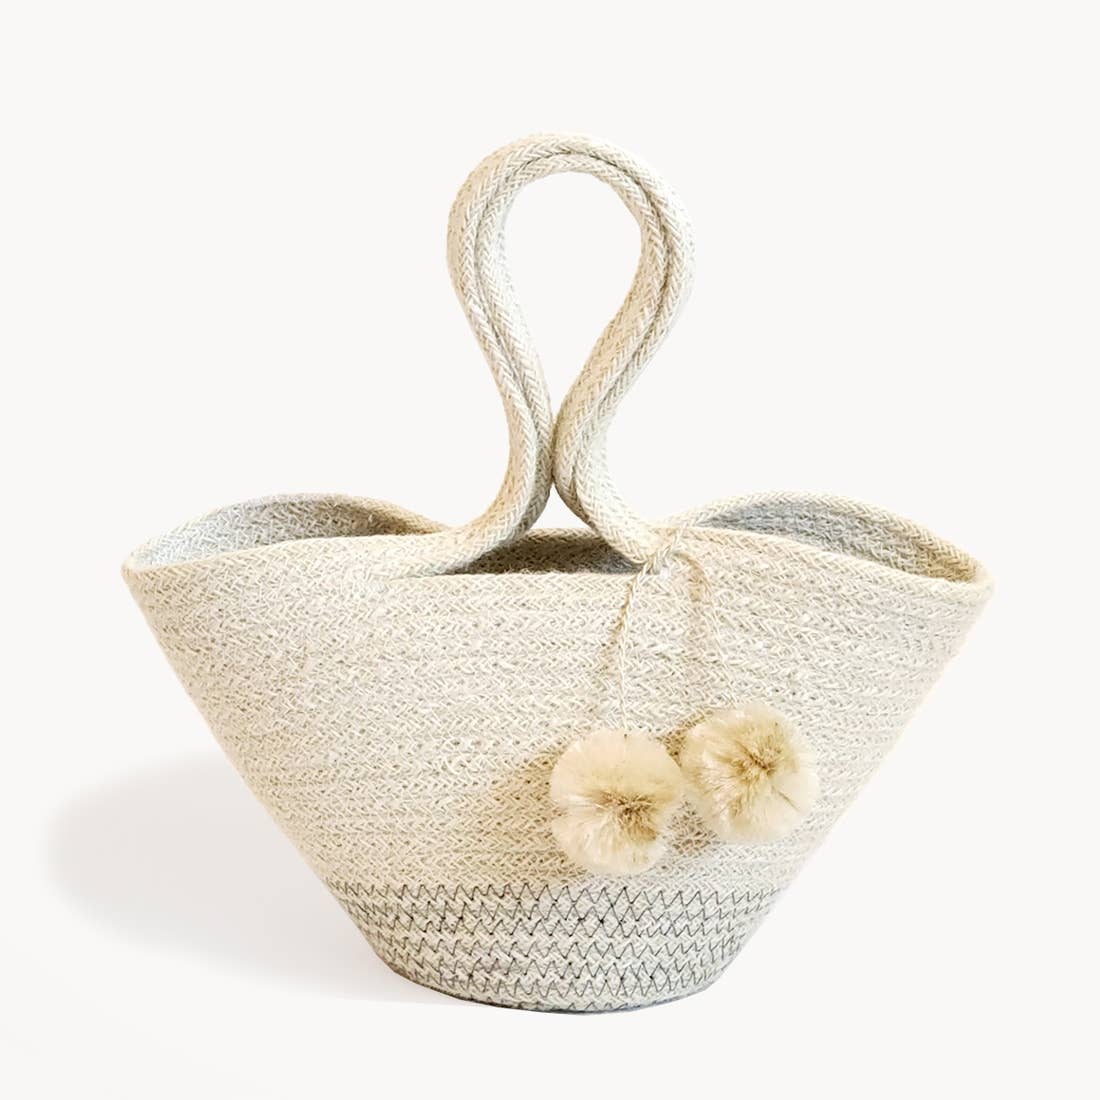 Fair Trade Sustainably Handwoven Eco-friendly Jute Bag